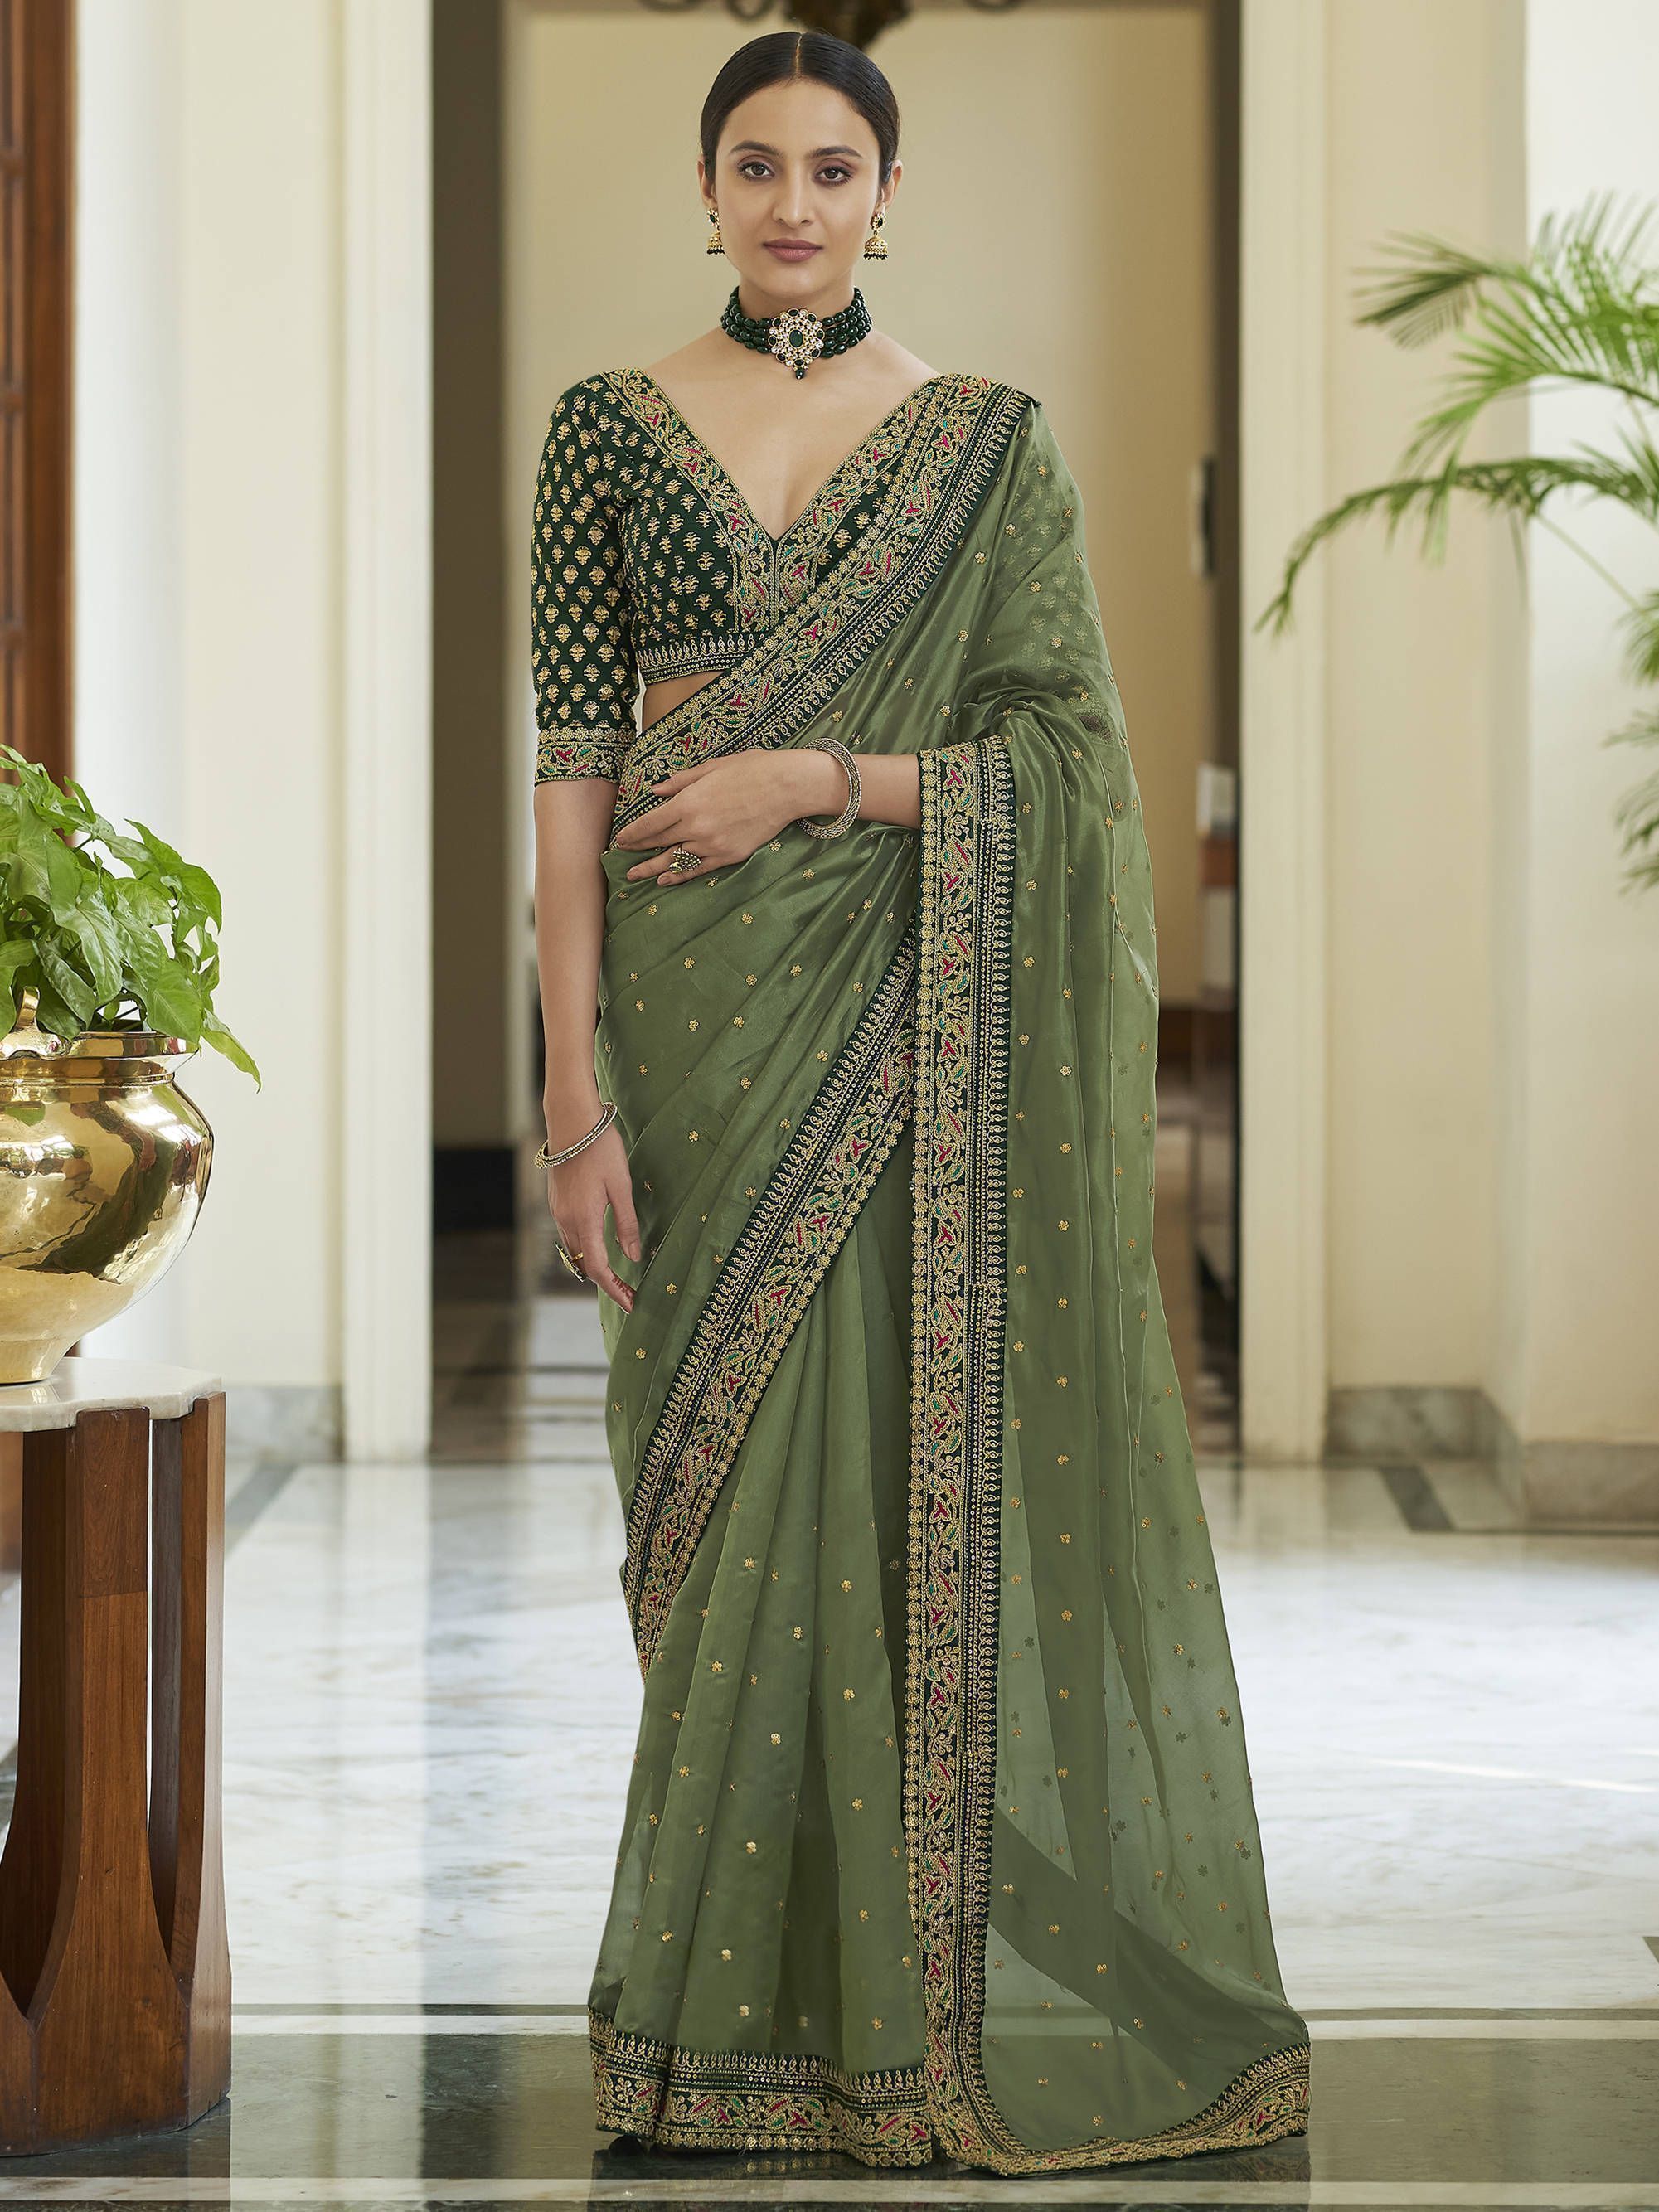 Latest Indian Wedding Sarees For Women